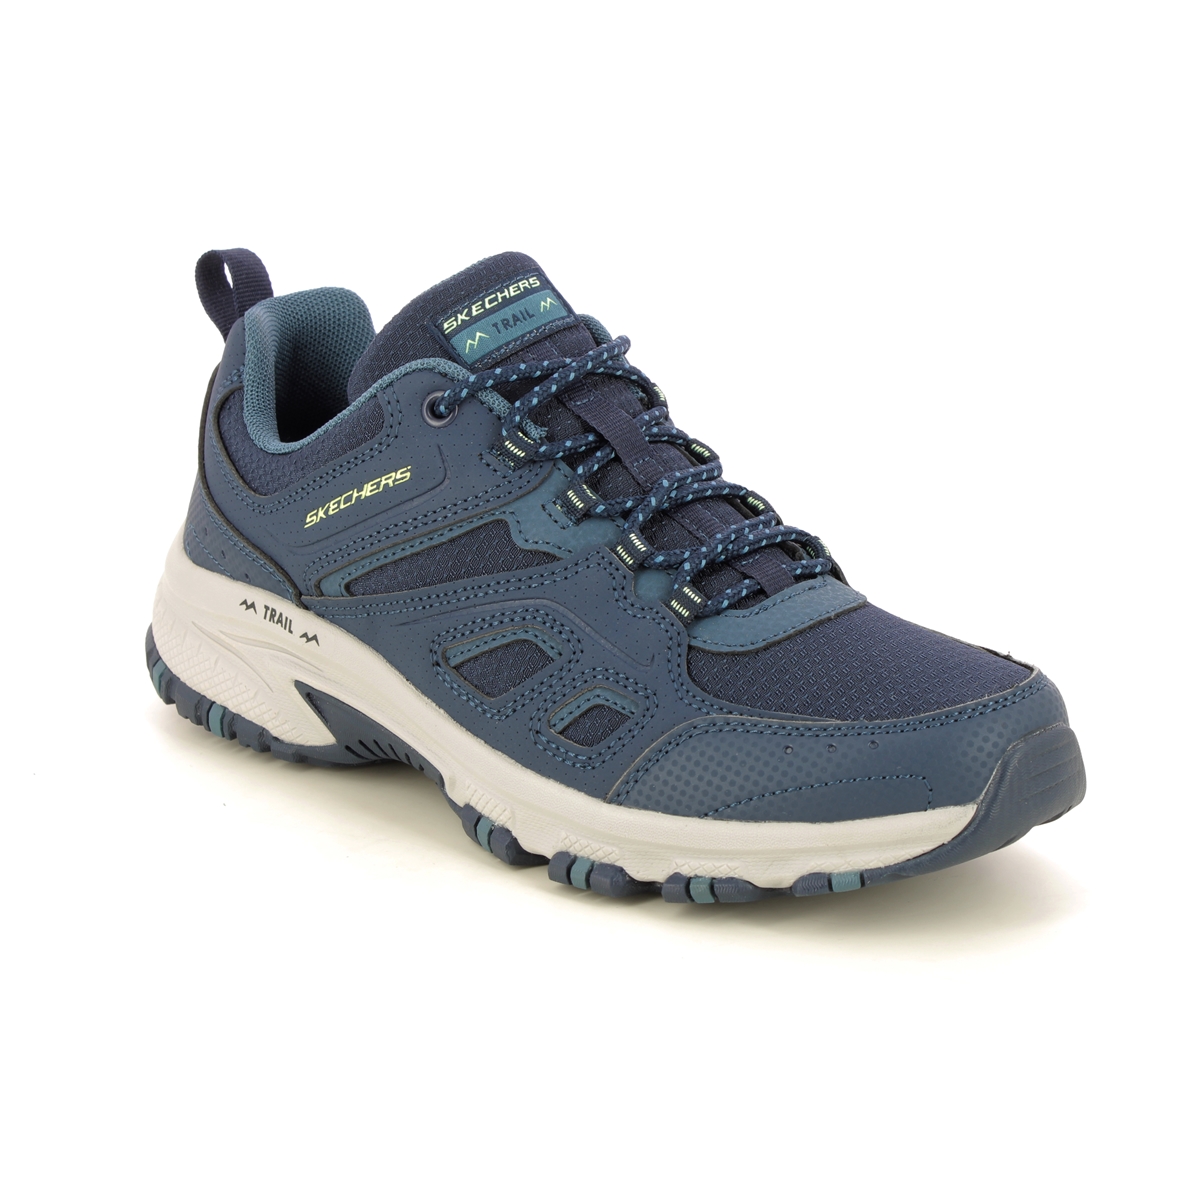 Skechers Hillcrest Path NVY Navy Womens Walking Shoes 180022 in a Plain Man-made in Size 8